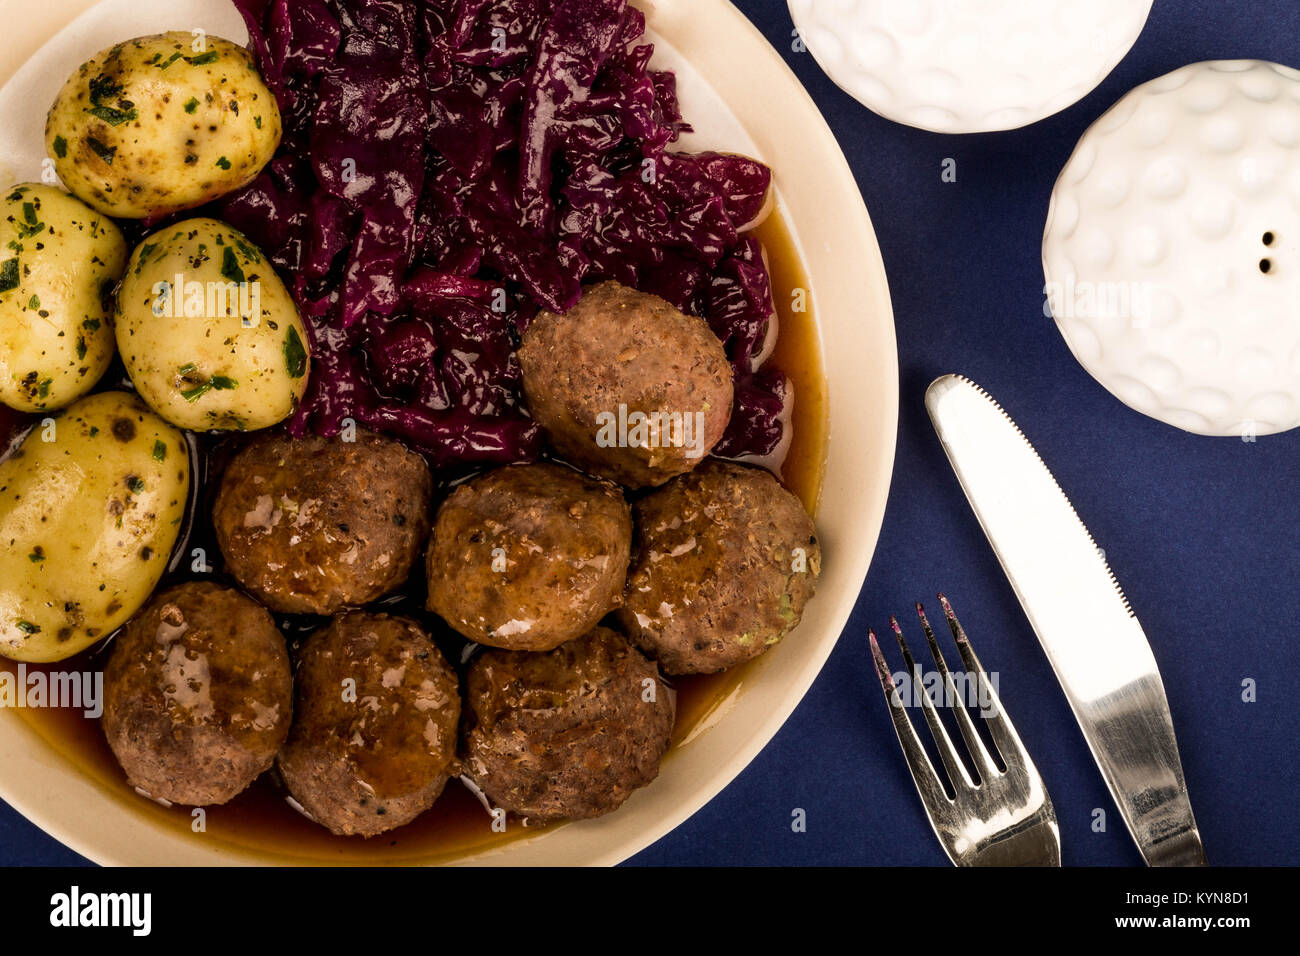 Intensiv Sparsommelig lommeregner Swedish or Norwegian Meatballs With Boiled Potatoes Red Cabbage And Gravy  Meal Against A Purple or Blue Background Stock Photo - Alamy